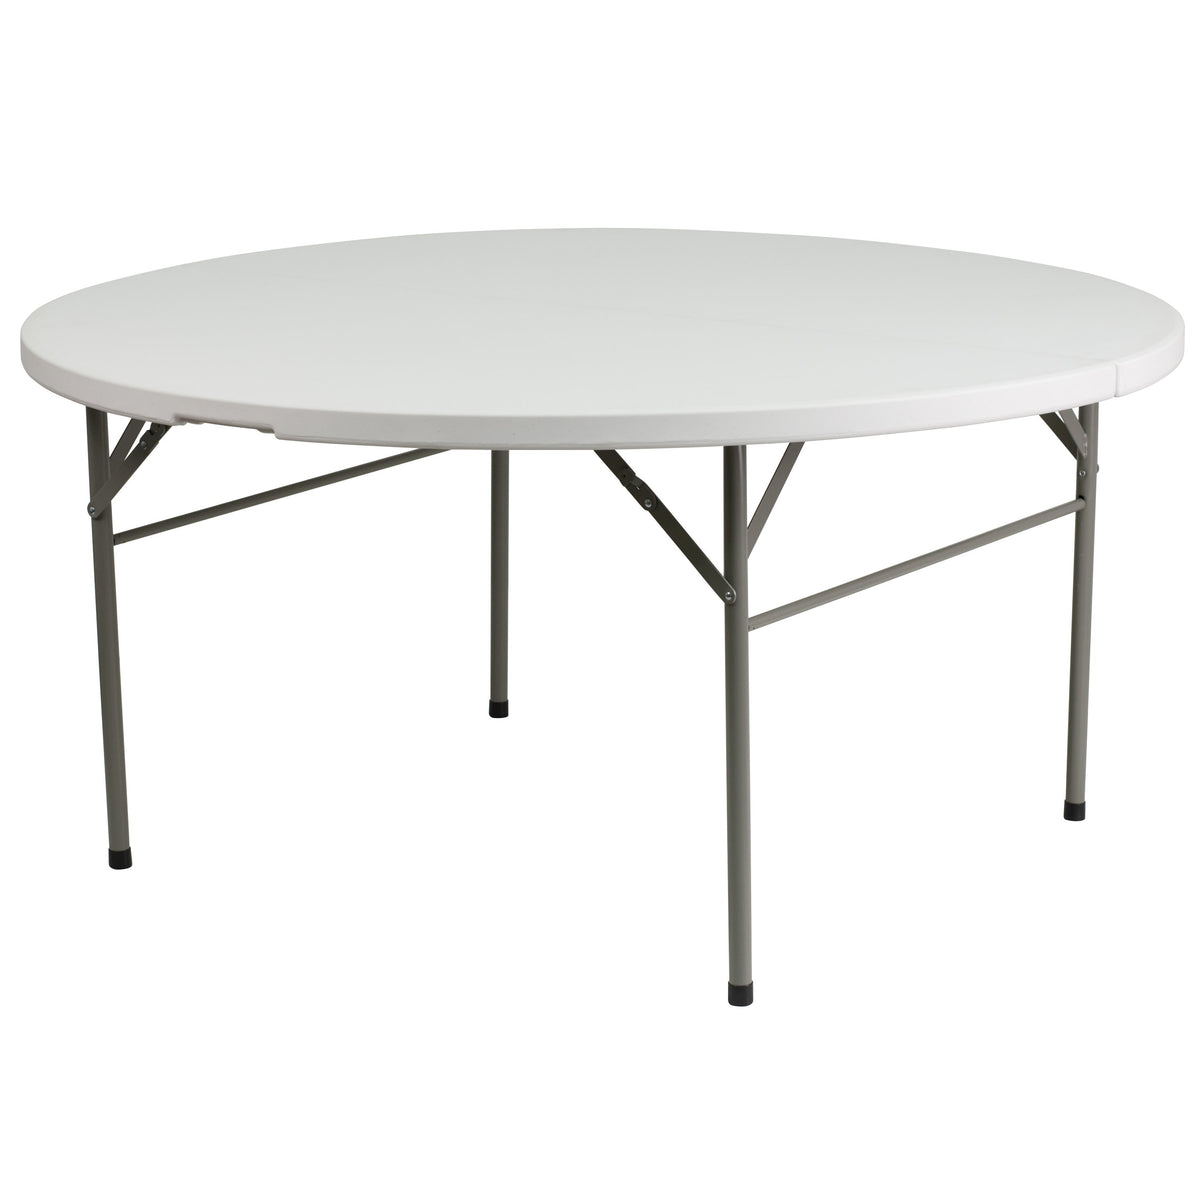 5-Foot Round Bi-Fold Granite White Plastic Folding Table with Carrying Handle